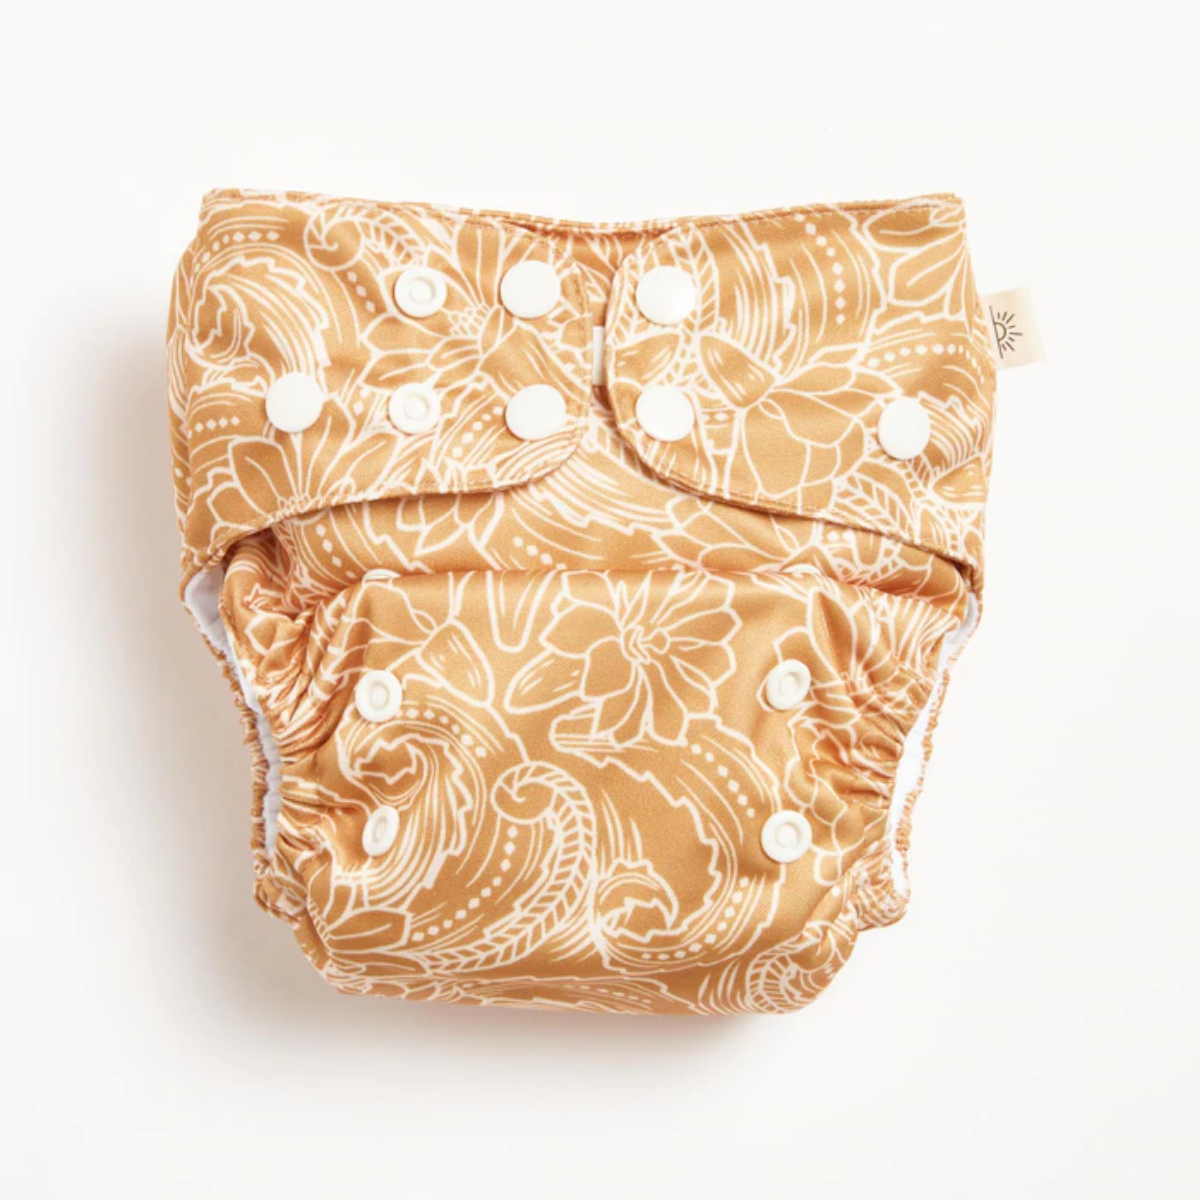 A modern cloth diaper with a native print from EcoNaps in the shade Desert Cactus.